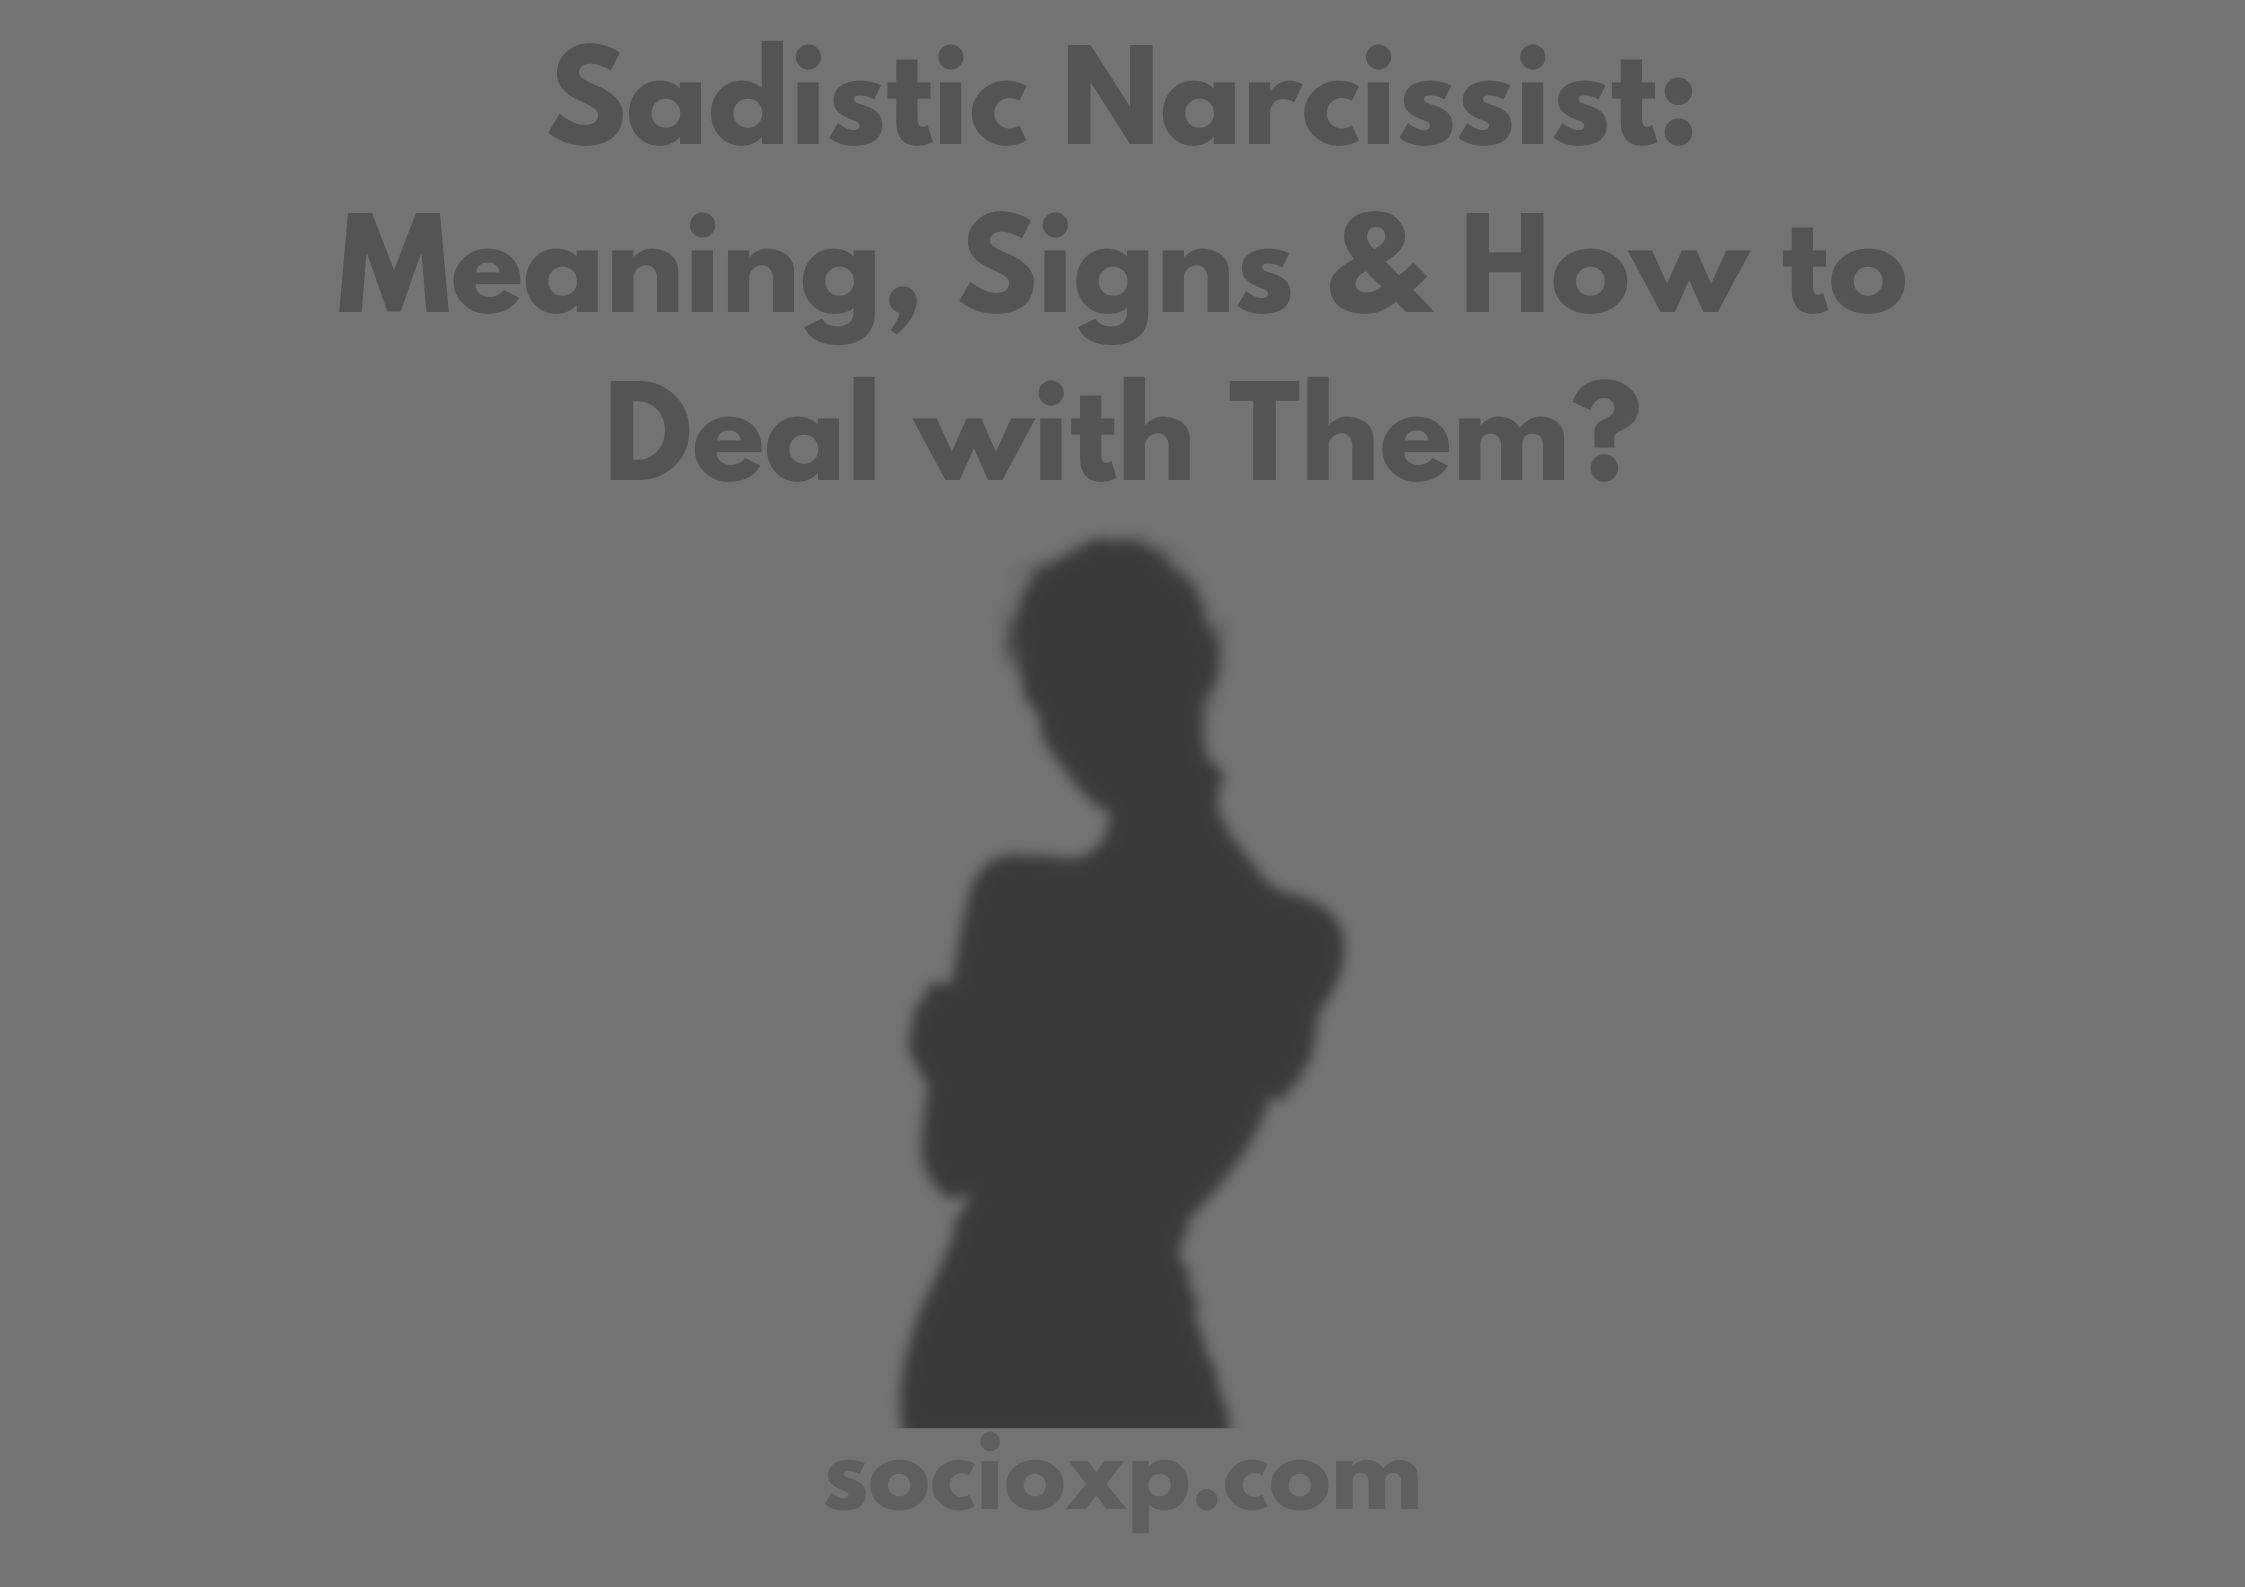 Sadistic Narcissist: Meaning Signs & How to Deal with Them?